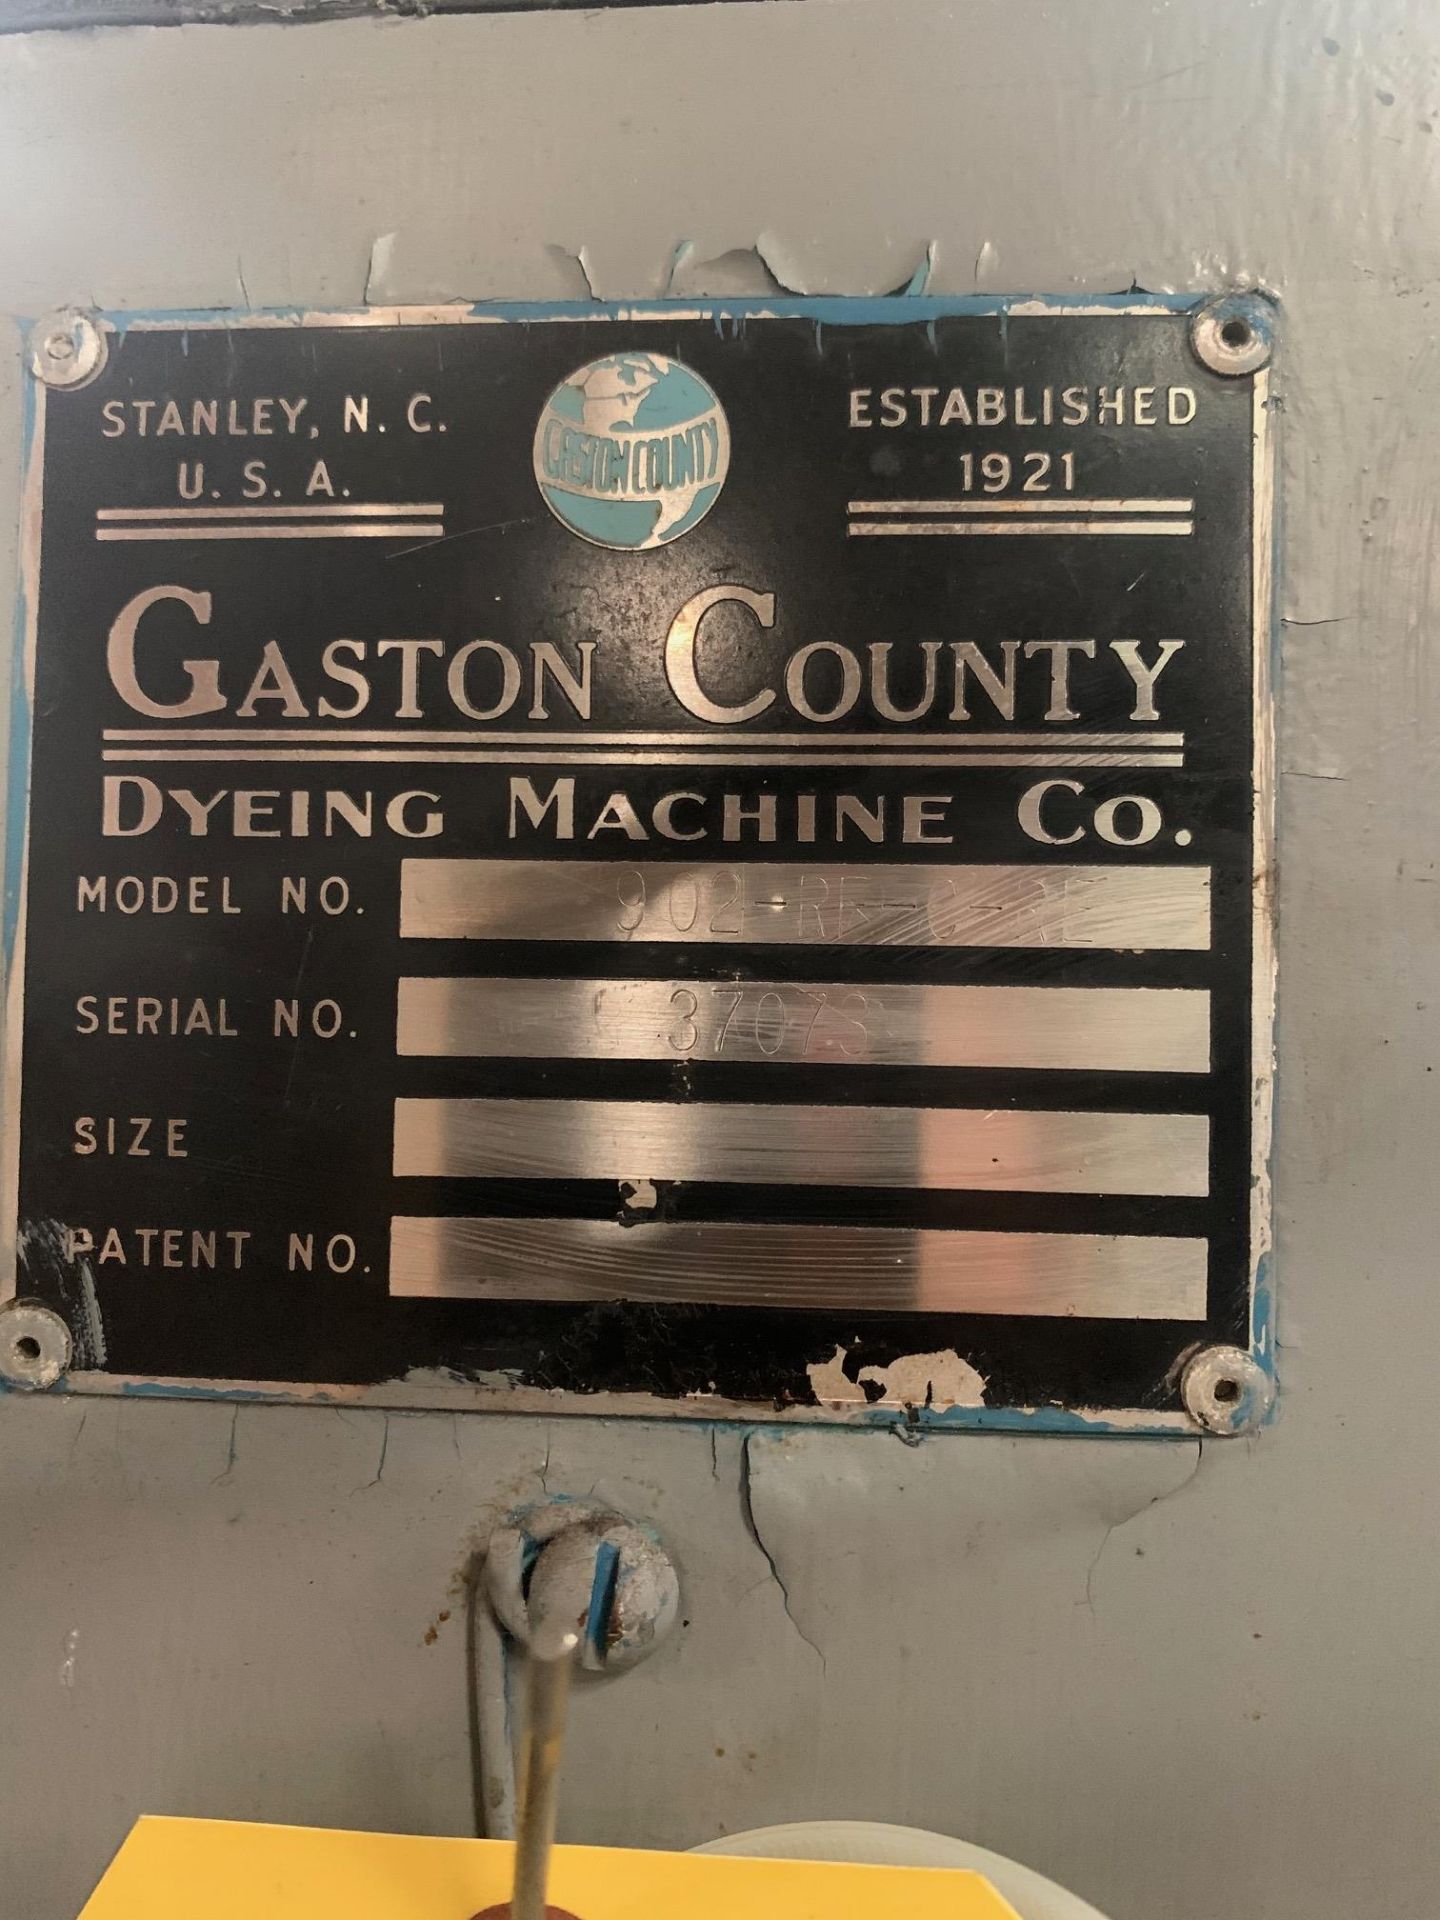 Gaston County Dyeing Machine, Model# 1.4414, Serial# 2.21.89, Working Width 6", 2 HP, 575V, - Image 2 of 9